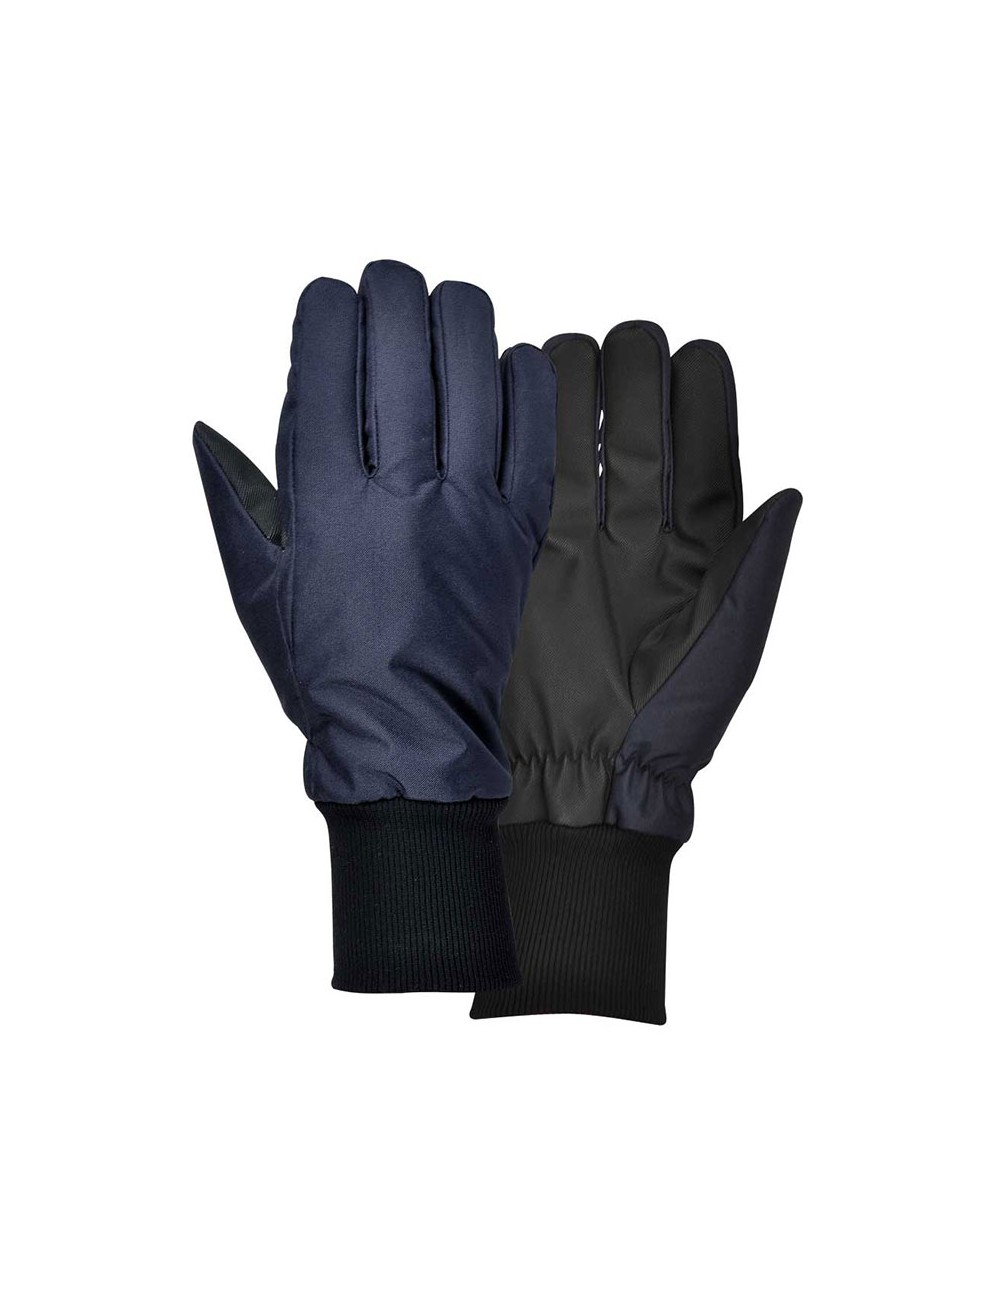 GLOVES FOR OUTDOOR AND COLD...